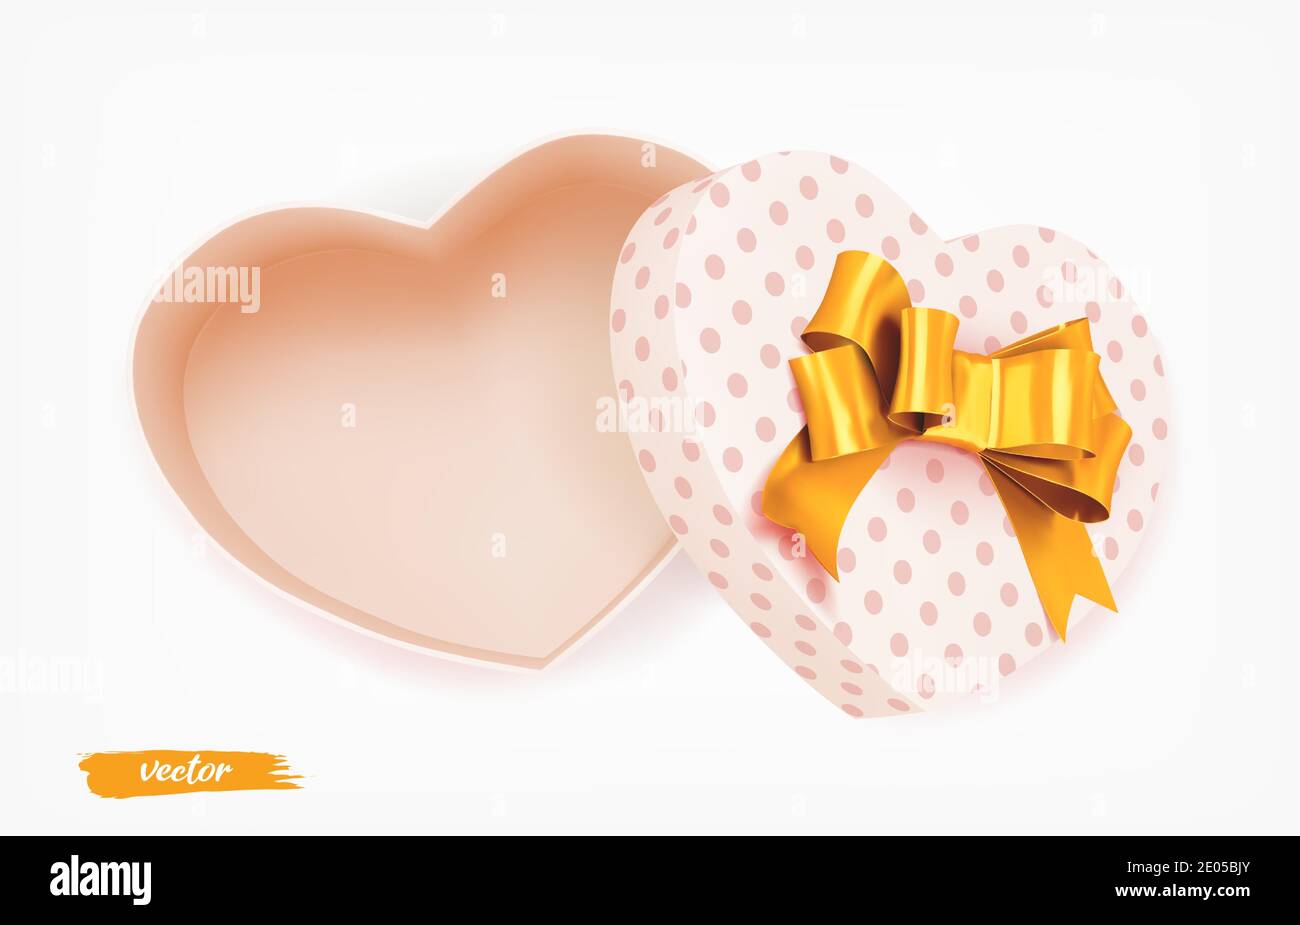 Pink heart shape gift box with gold bow and polka dot pattern on white background. Open gift box. 3d realistic vector. Romantic holiday presents Heart Stock Vector